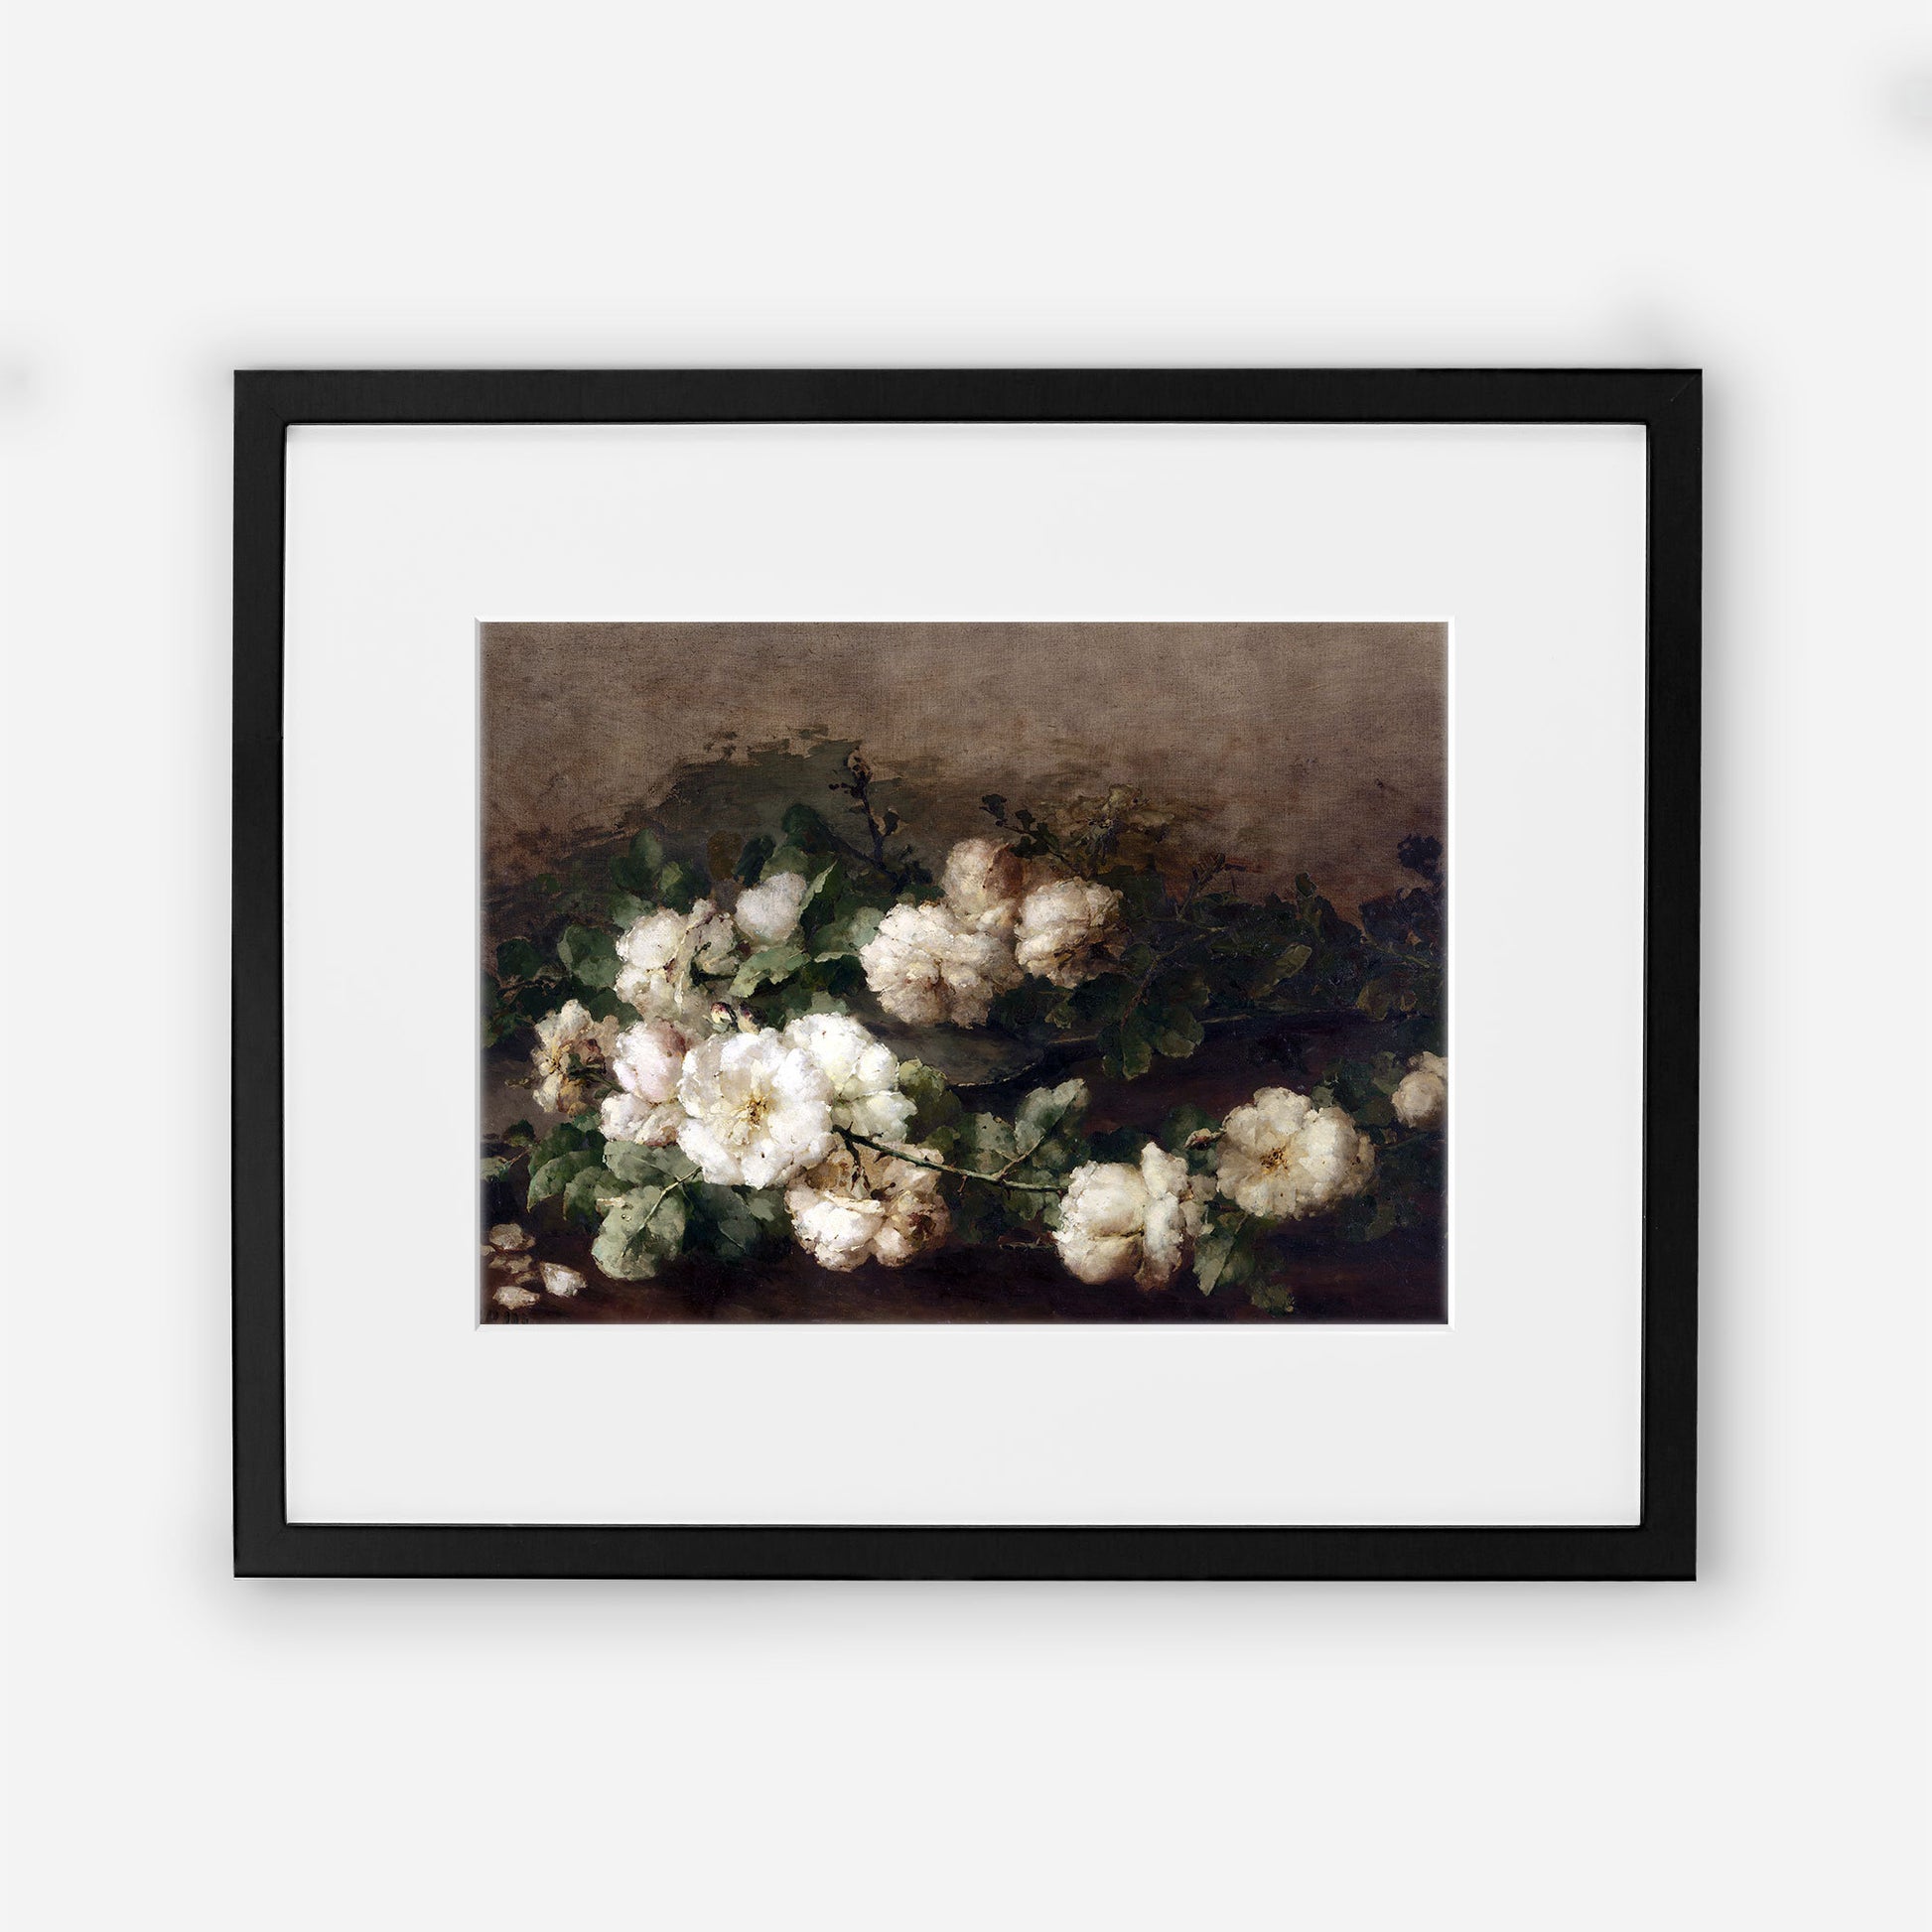 Flowers Art Poster with white and black - Vintage Copy Picture Art - Bedroom Floral decor - Printed and Shipped - Laying White Flowers